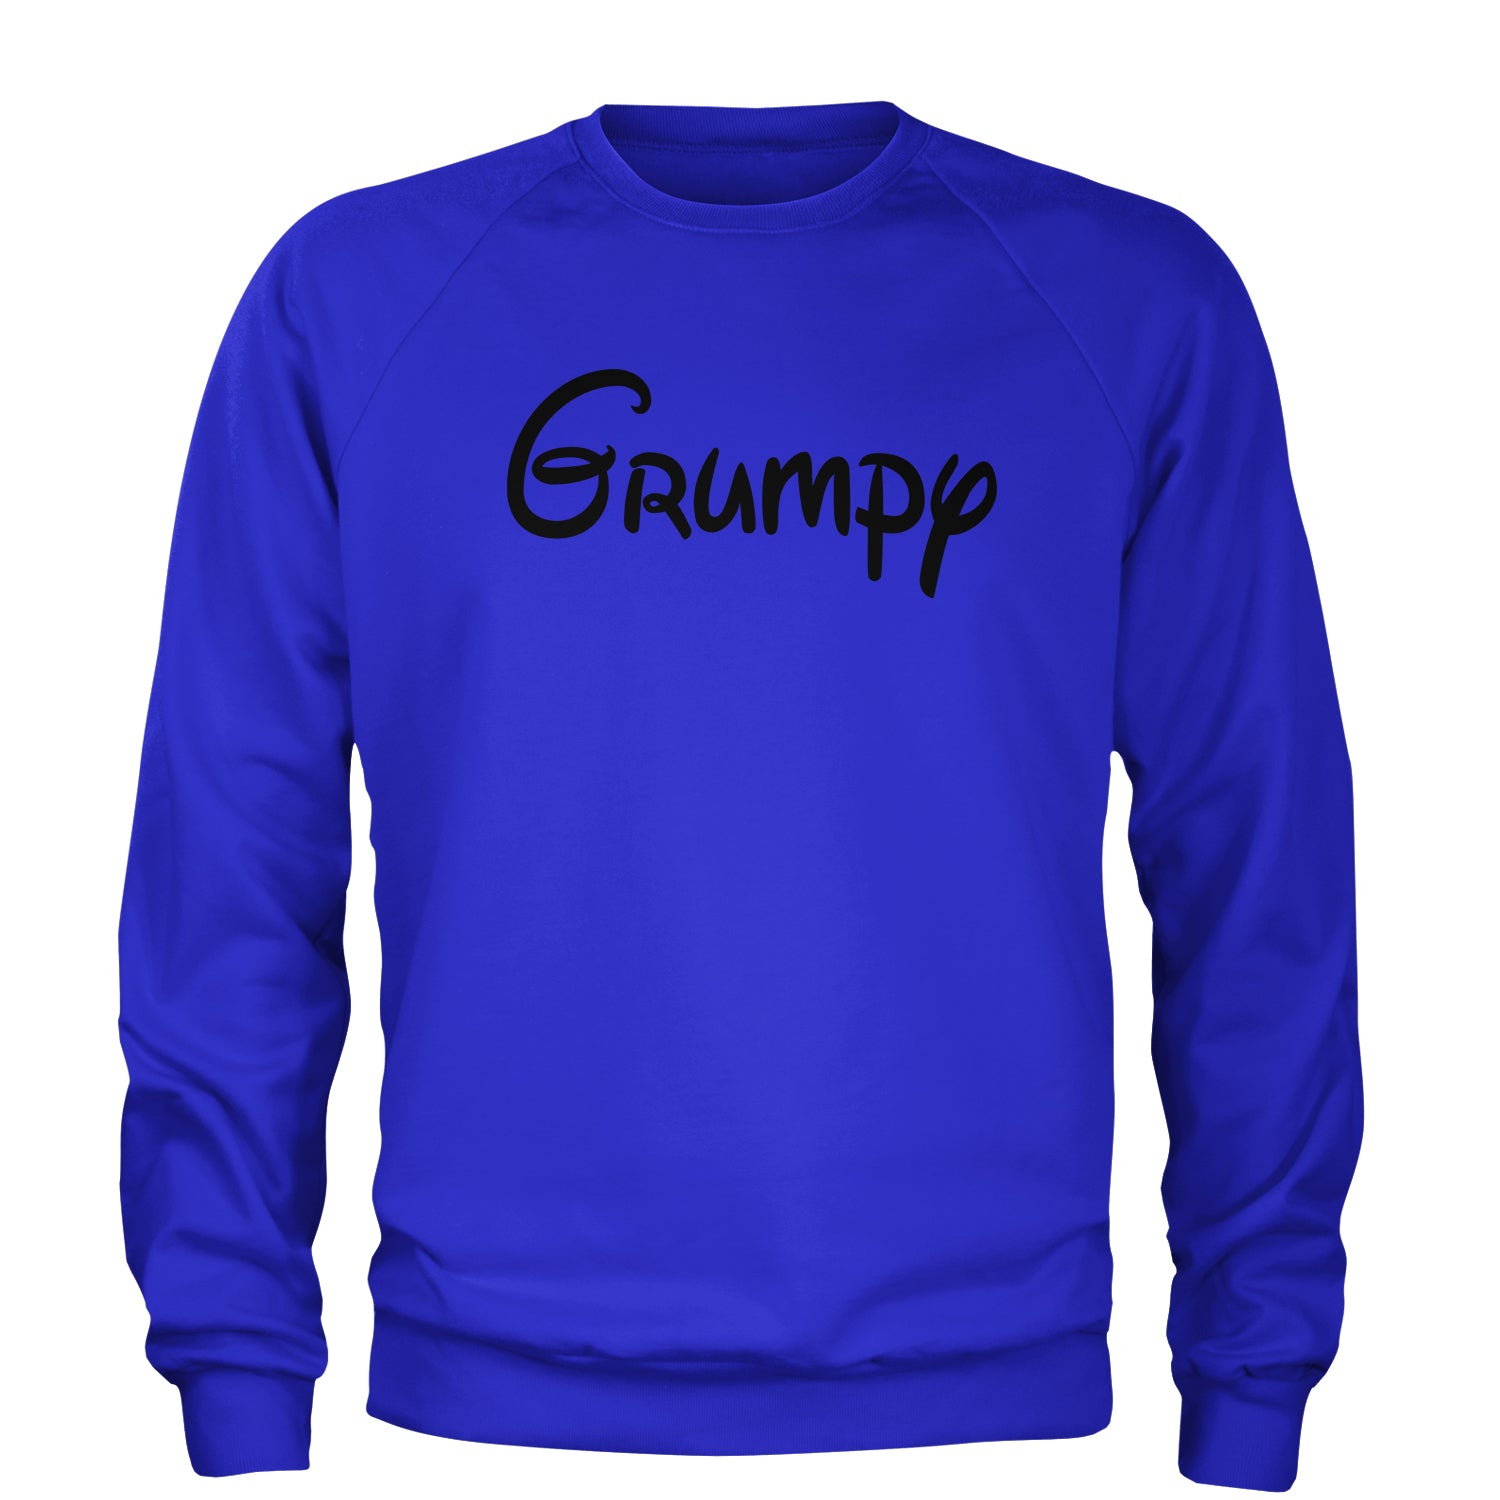 Grumpy - 7 Dwarfs Costume Adult Crewneck Sweatshirt and, costume, dwarfs, group, halloween, matching, seven, snow, the, white by Expression Tees